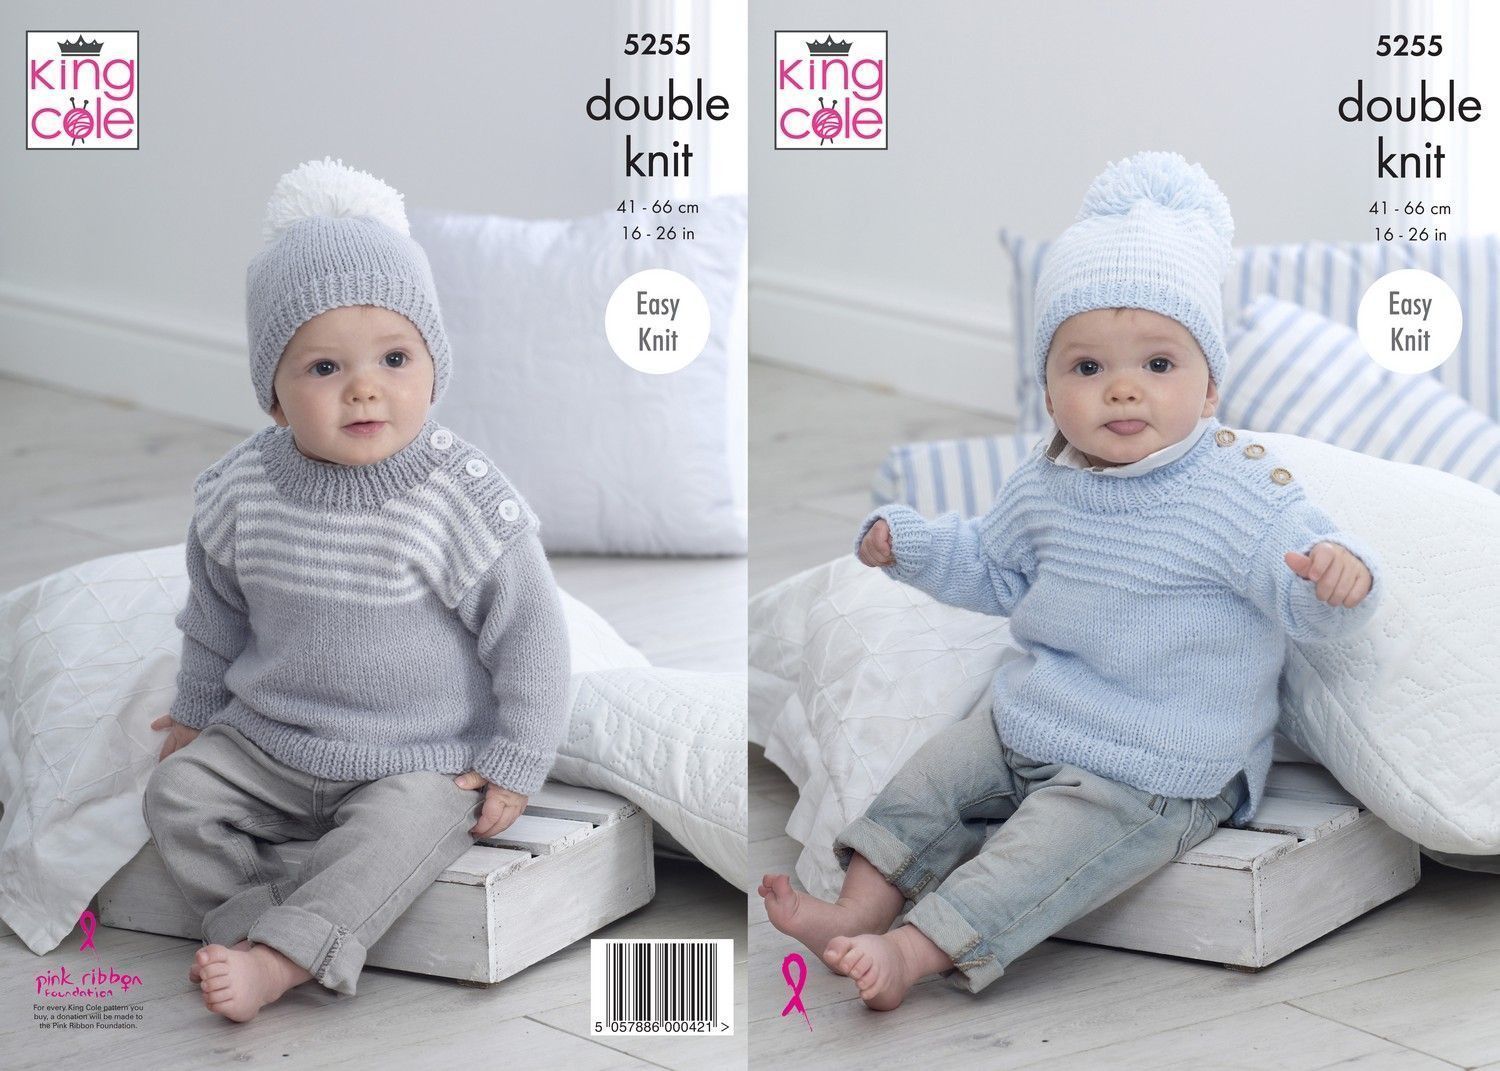 King Cole Sweaters & Hats Easy Knit Pattern 5255 - Big Value Baby DK